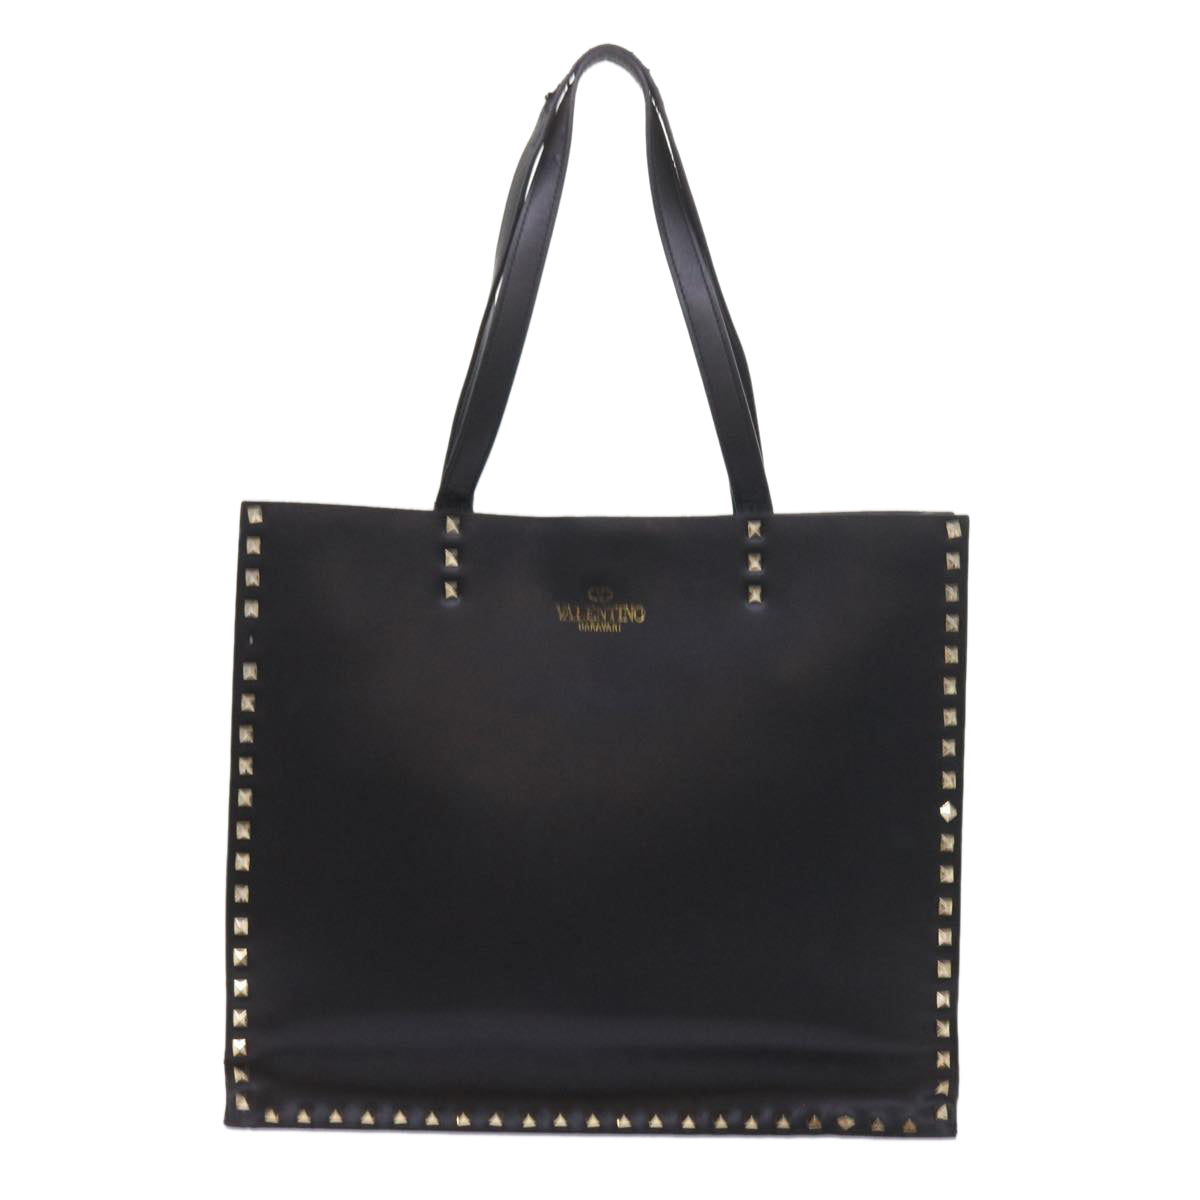 VALENTINO Tote Bag Leather Black Auth bs8764